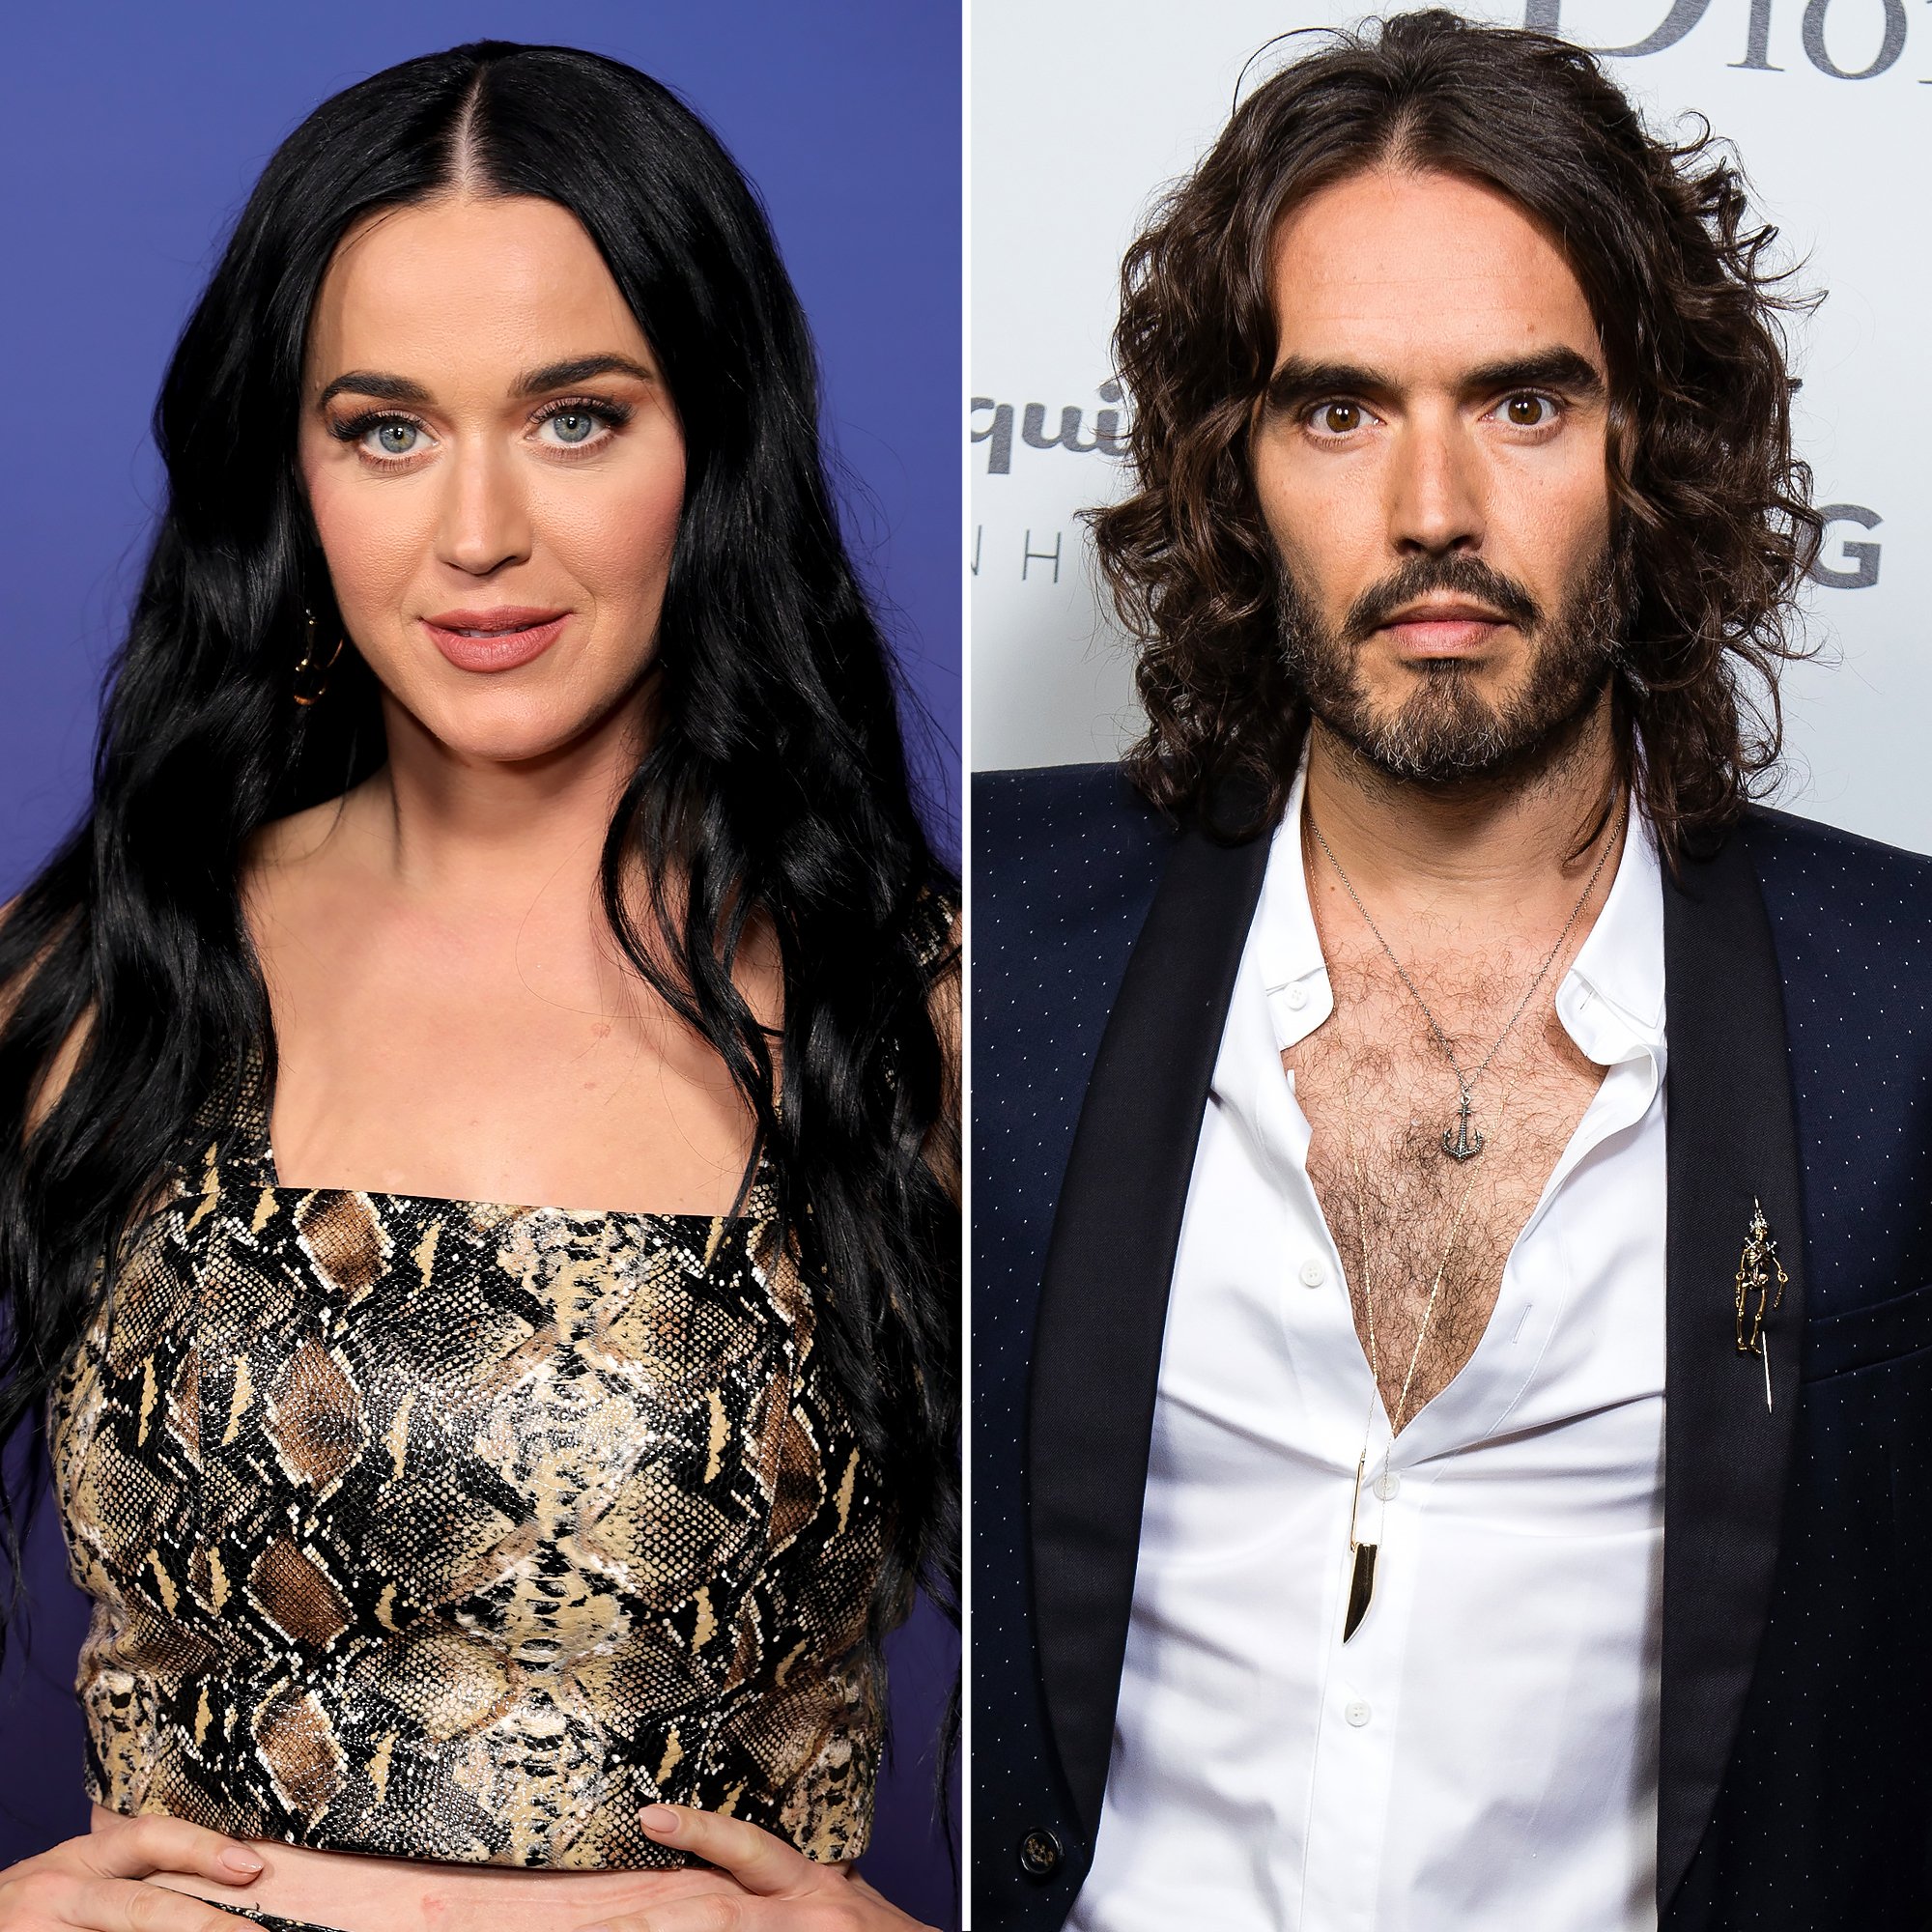 Katy Perry Said She Knew ‘Real Truth’ About Russell Brand 10 Years Ago